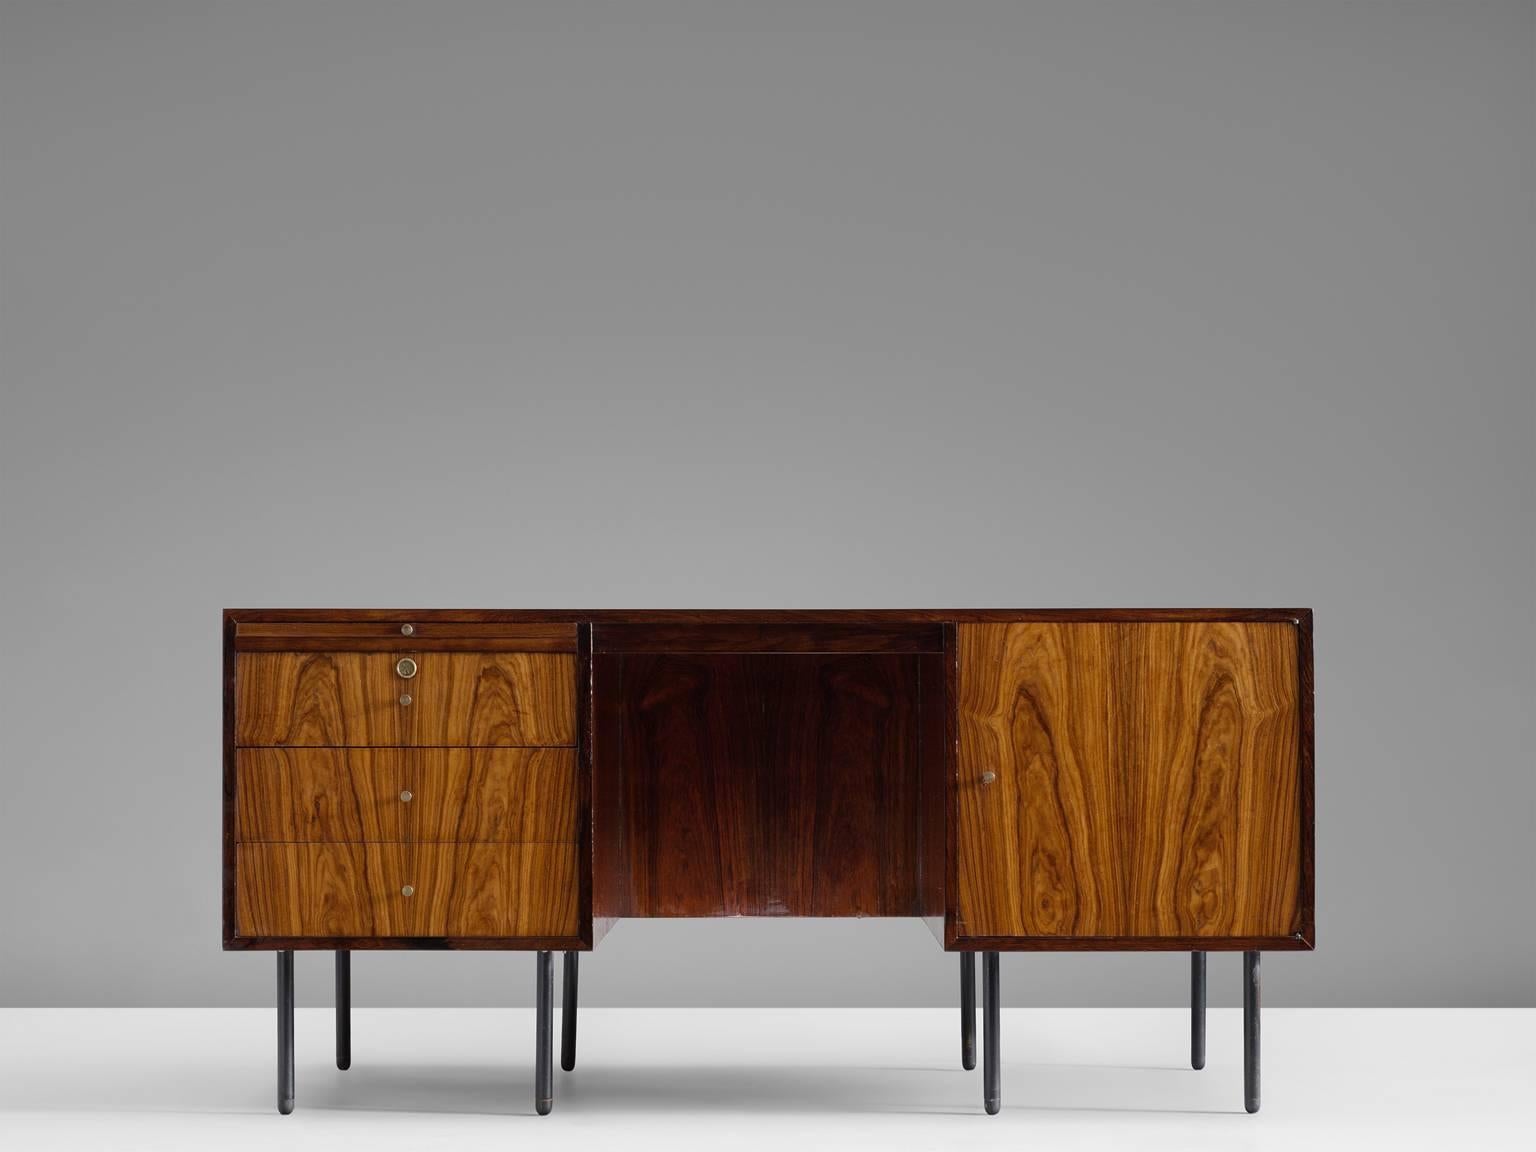 Executive desk, in rosewood and metal by Martin Eisler and Carlo Hauner, Brazil, 1960s.

Freestanding desk in rosewood by Brazilian designer duo Eisler and Hauner. Elegant writing desk designed with high attention to detail. The small cylindrical